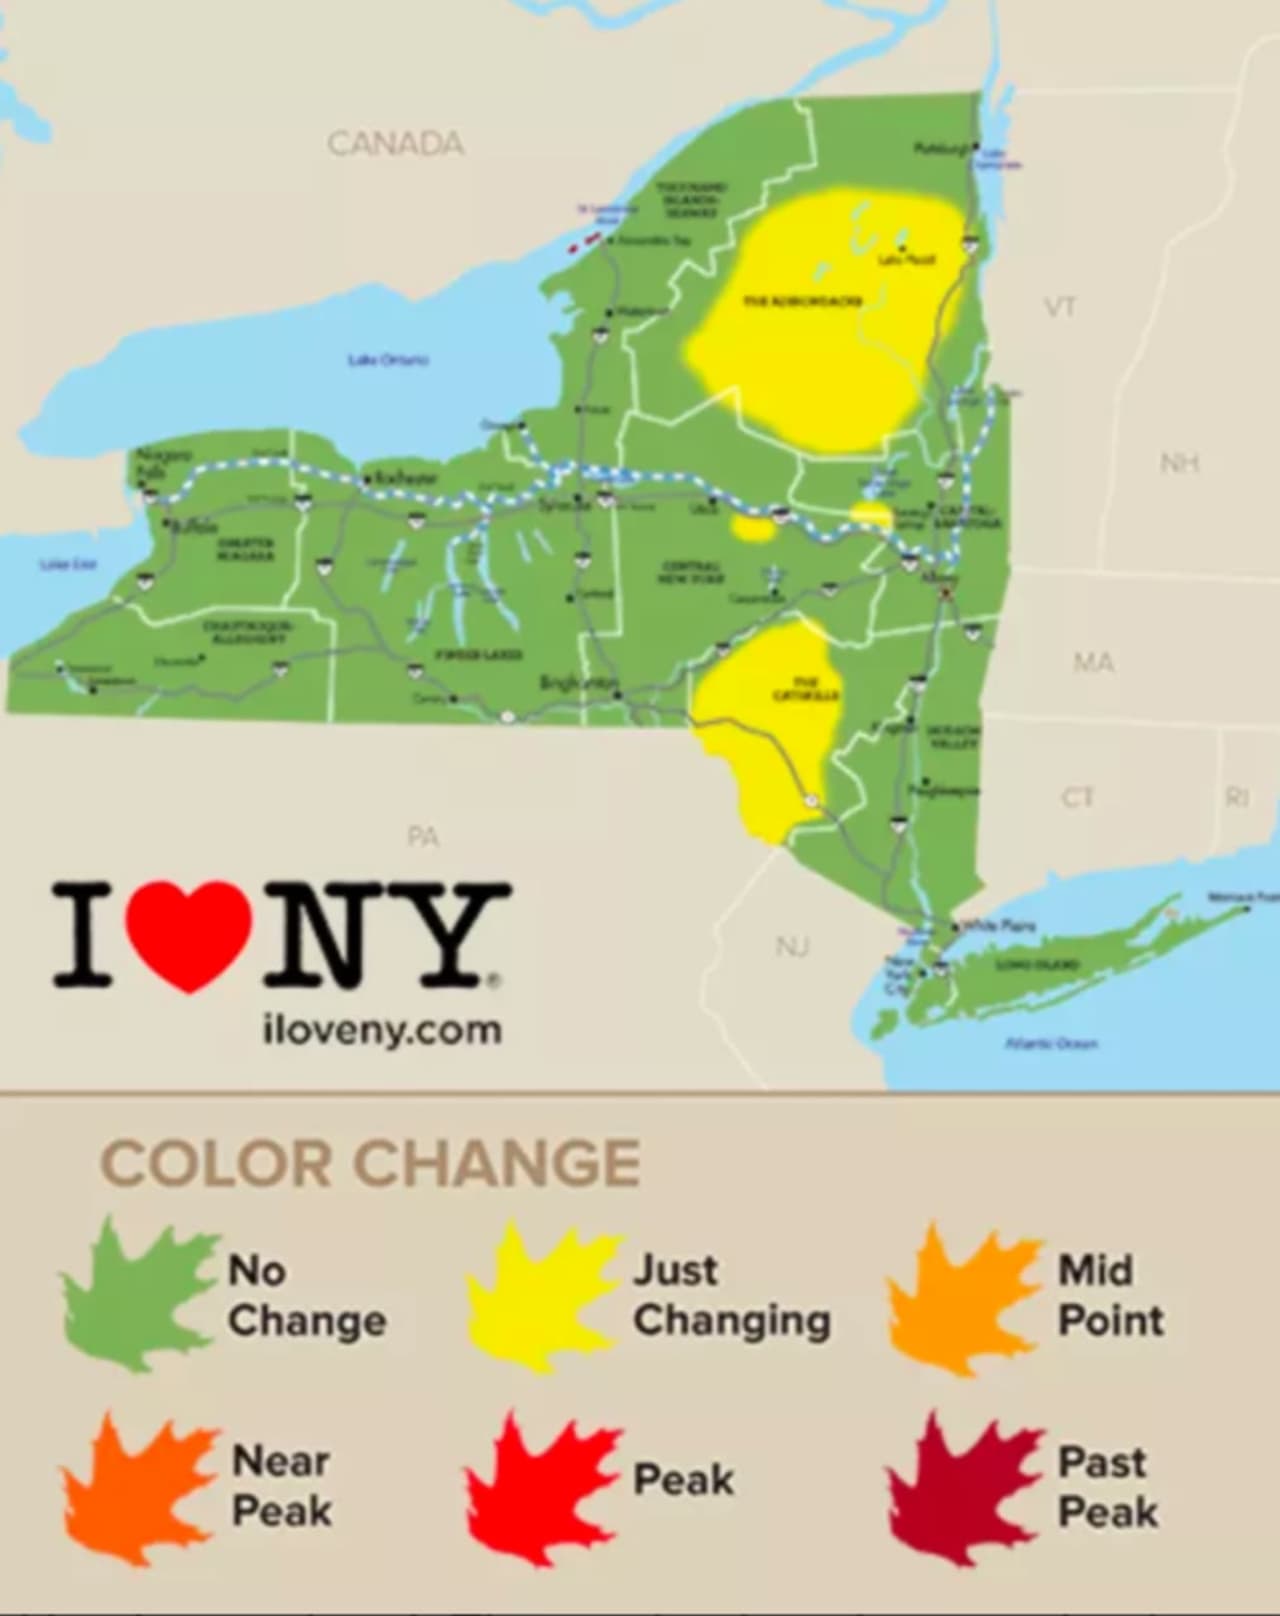 Conditions are prime for vibrant foliage across the Hudson Valley and all of New York, with some portions of upstate (shown in yellow) already seeing change.